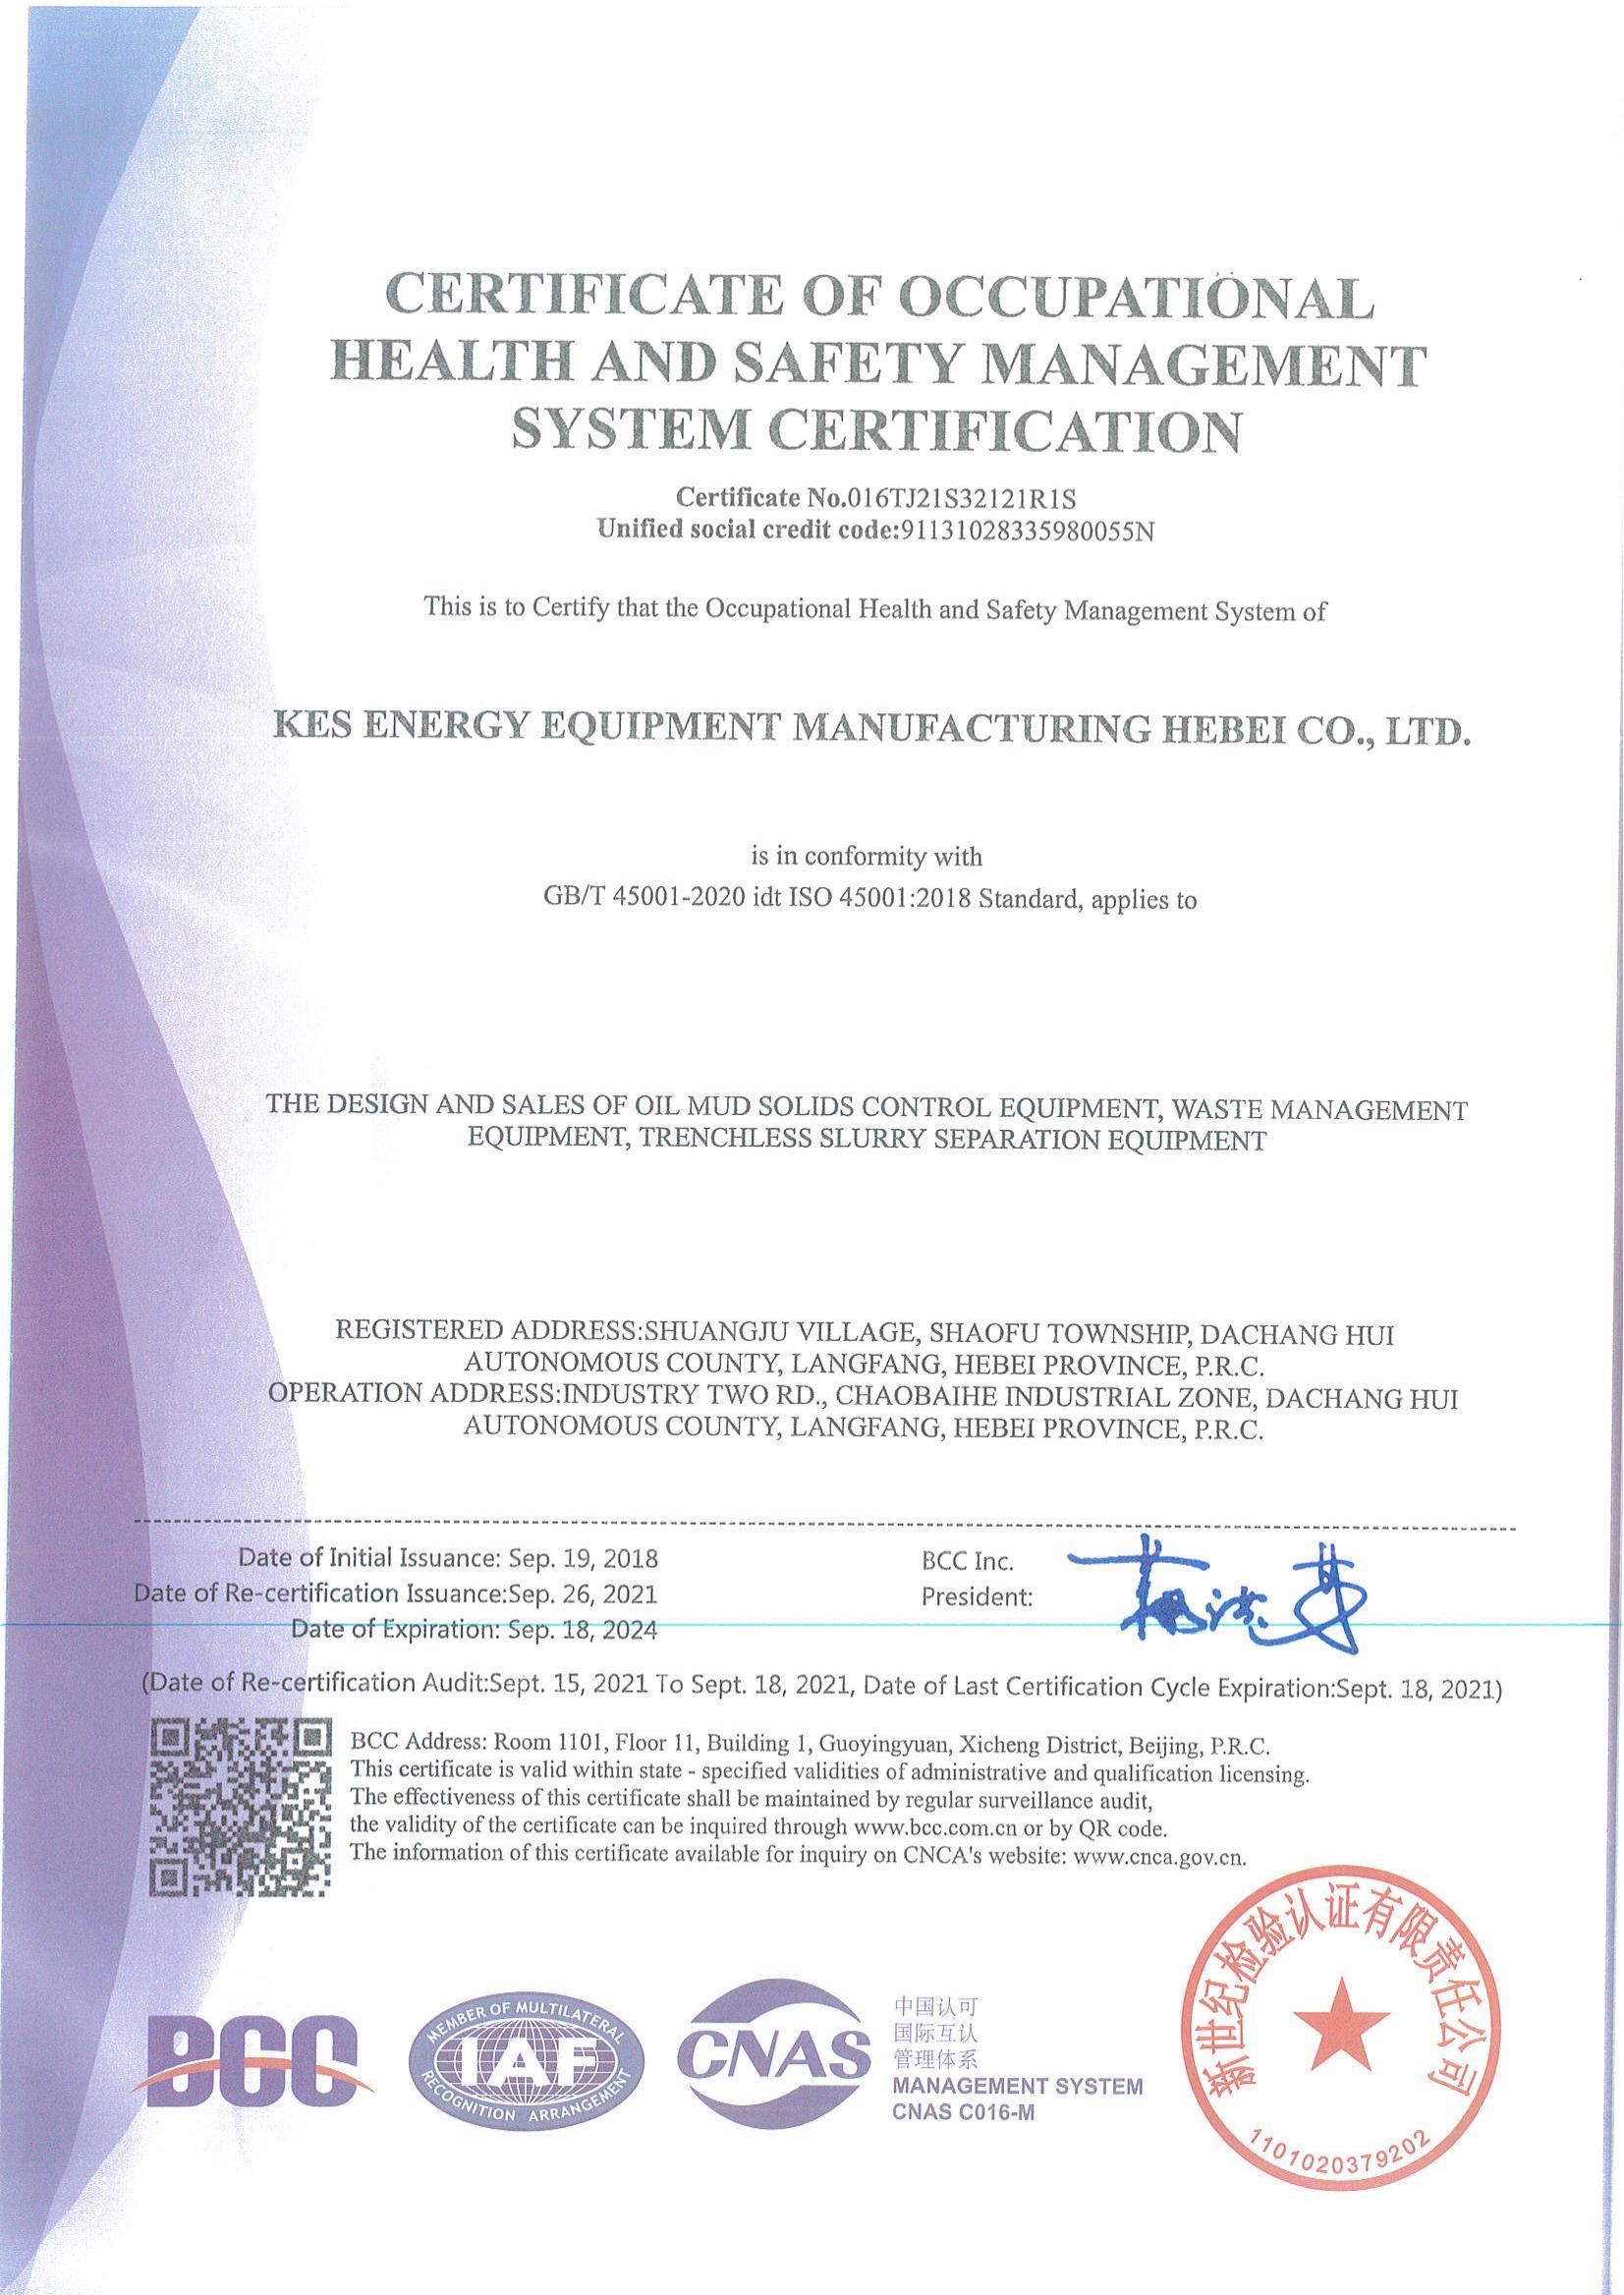 Occupational Health and Safety Management System Certification-English